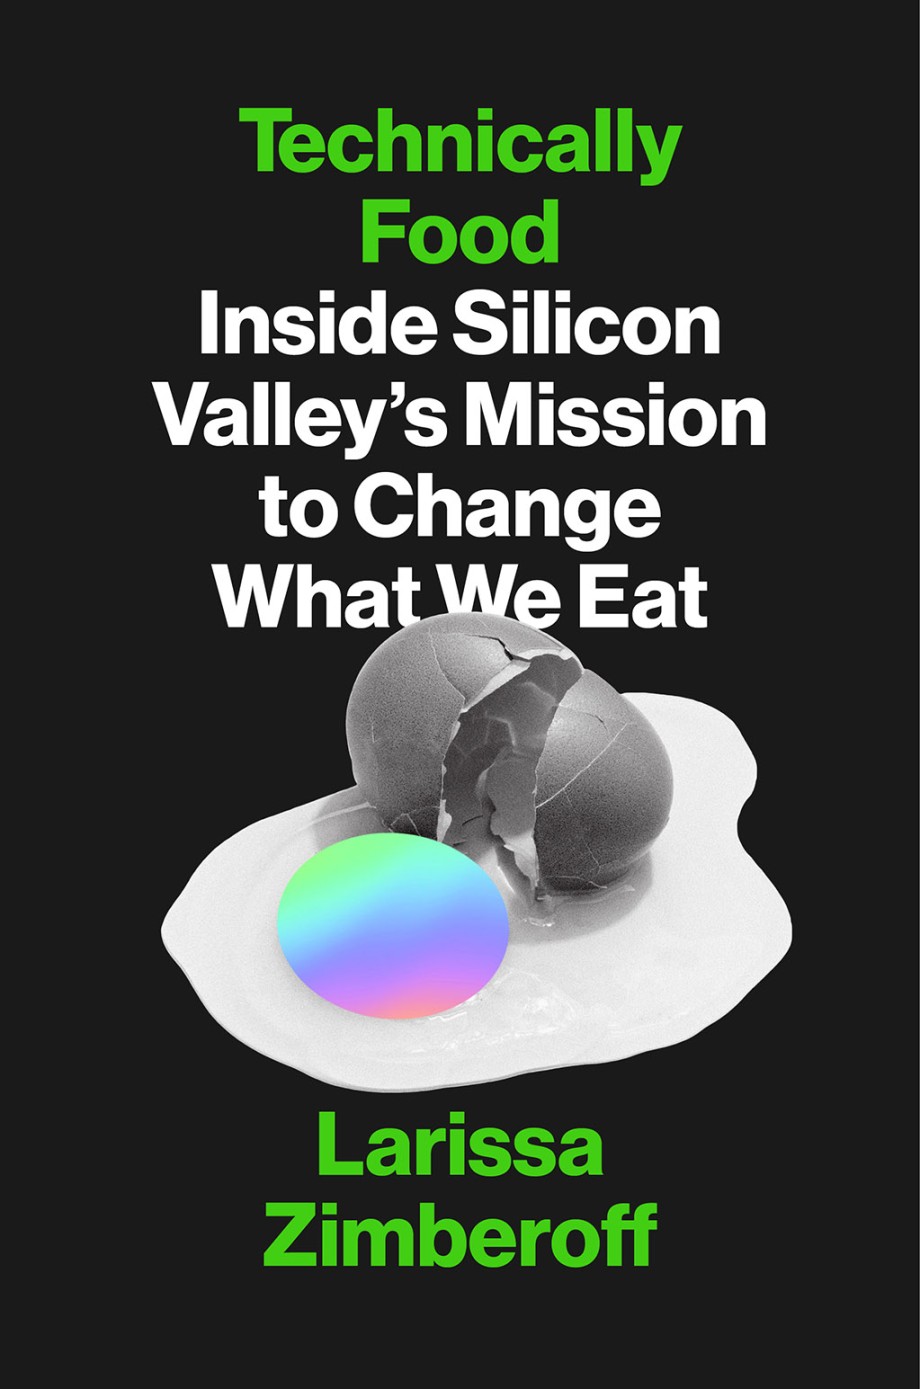 Technically Food Inside Silicon Valley's Mission to Change What We Eat